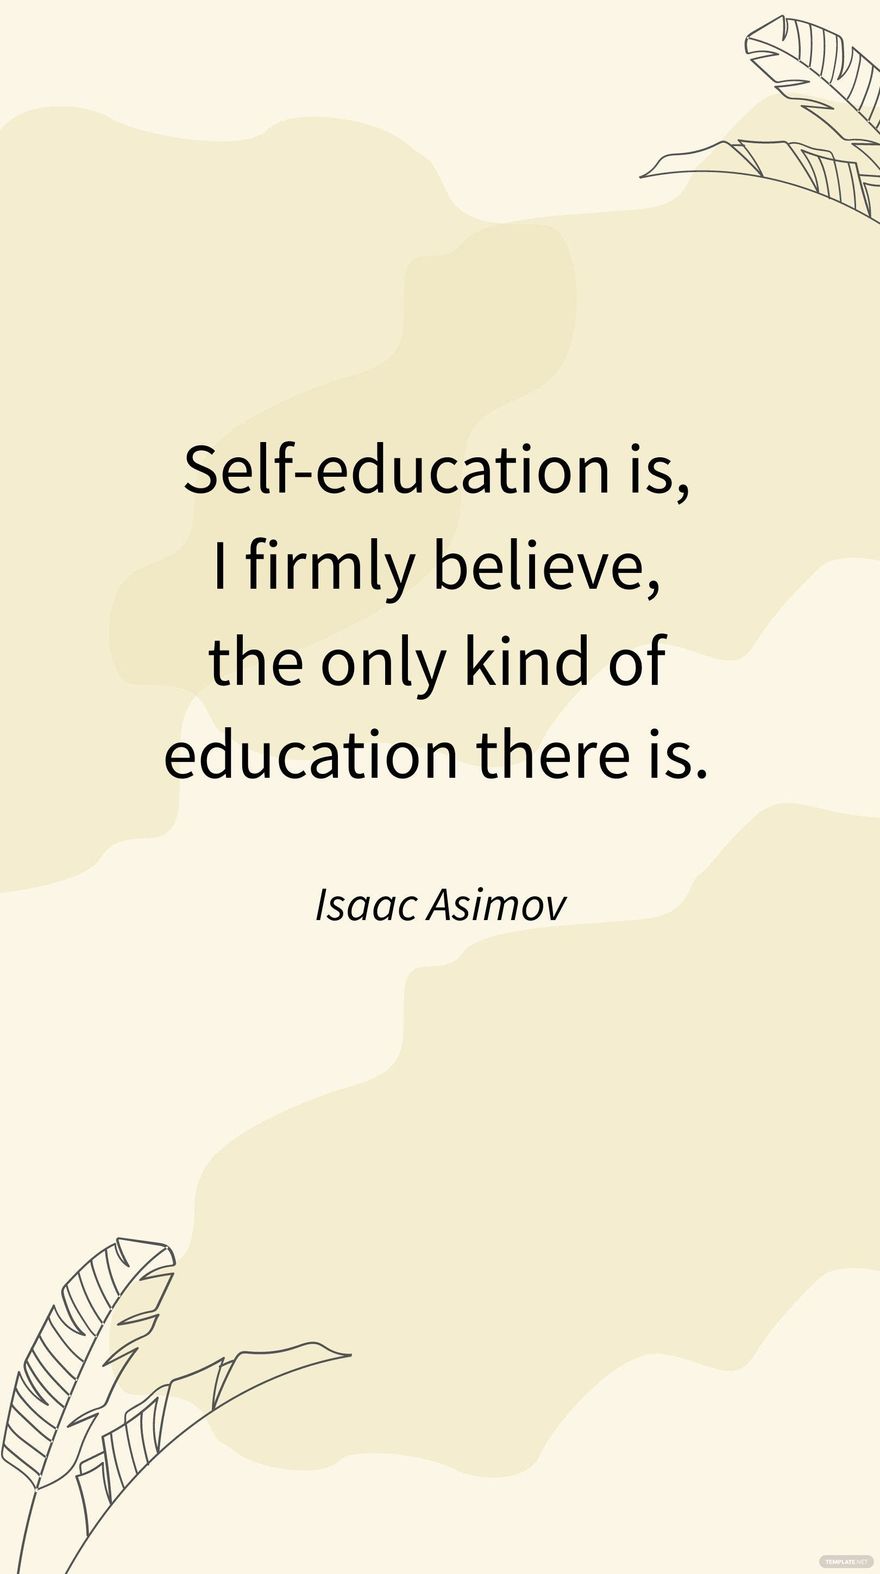 Free Isaac Asimov - Self-education is, I firmly believe, the only kind of education there is. in JPG